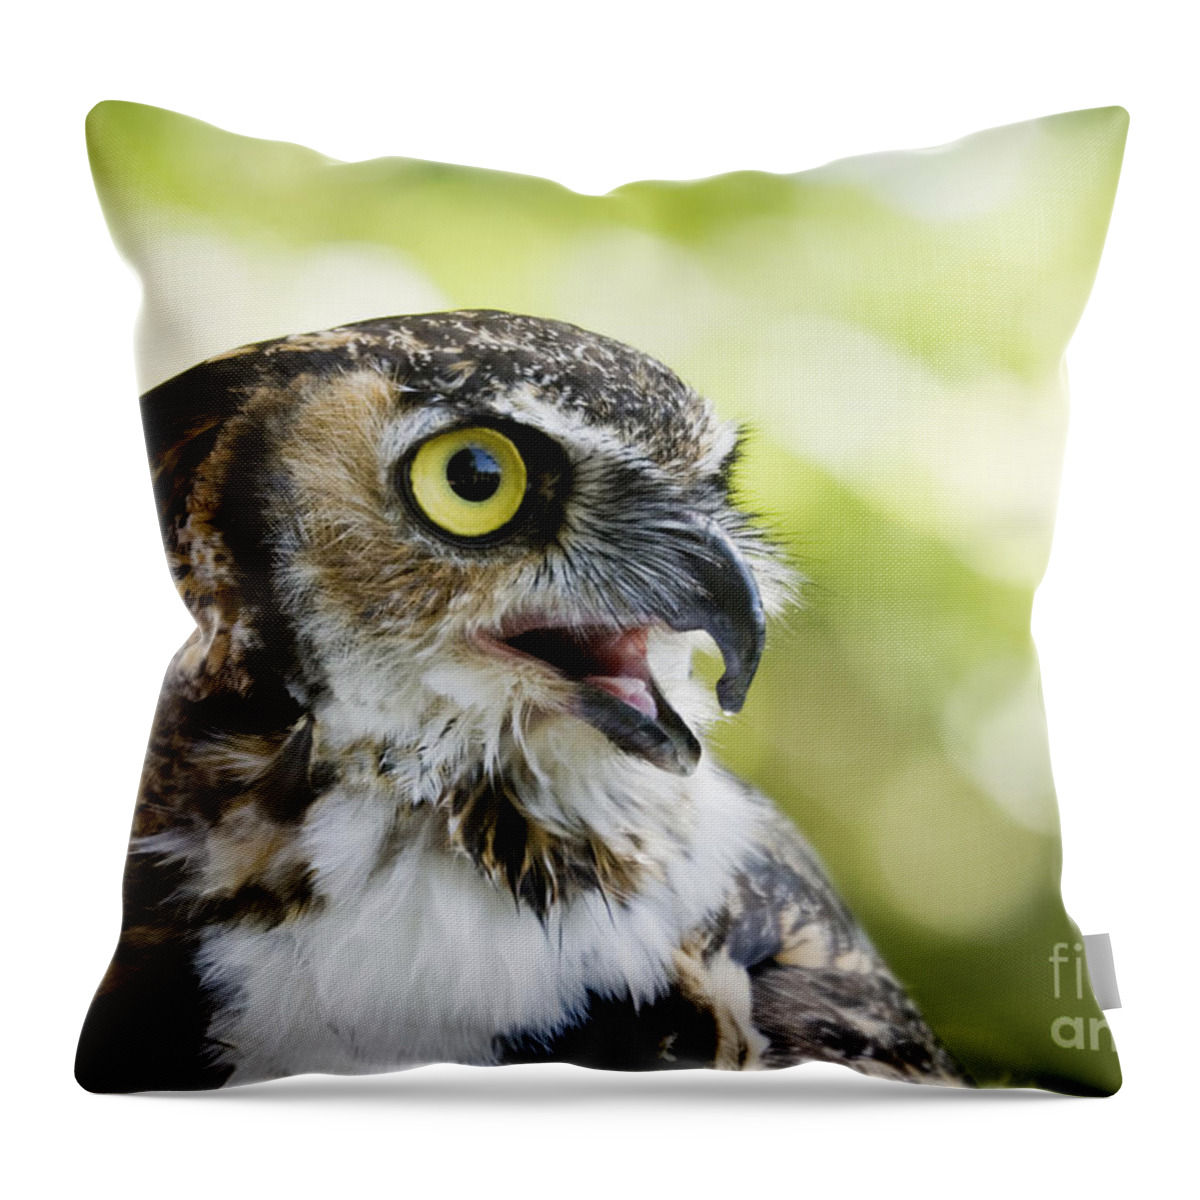 Great Horned Owl Throw Pillow featuring the photograph Great Horned Owl by Patty Colabuono